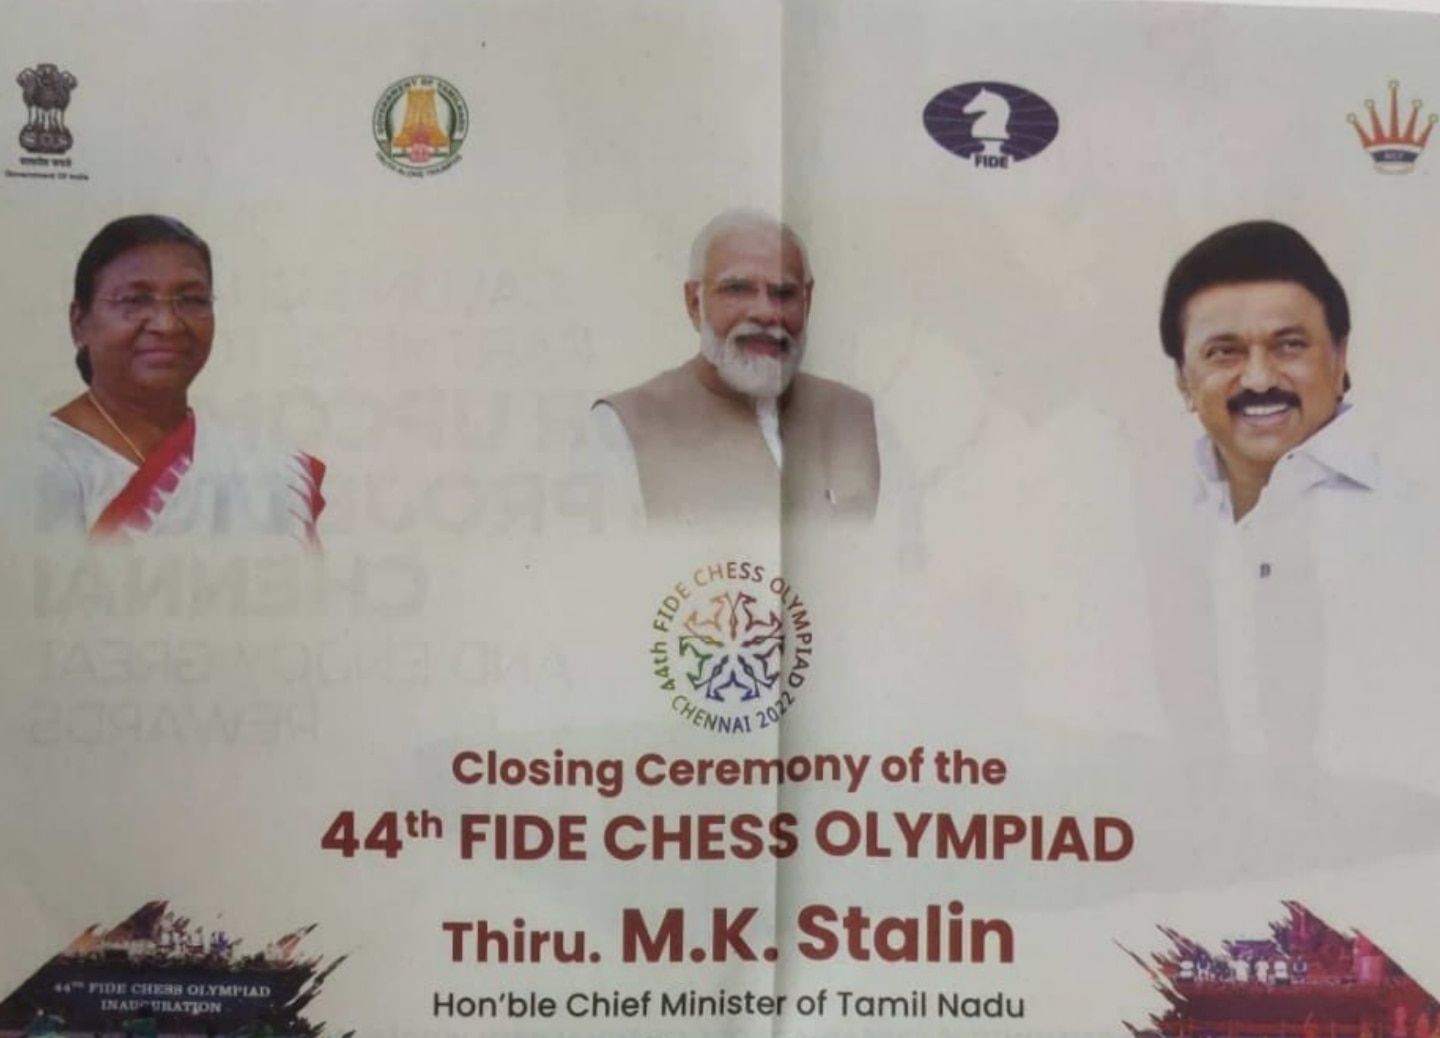 Chess Olympiad 2022: Madras High Court orders Tamil Nadu govt to publish  photos of PM Modi, President in ads